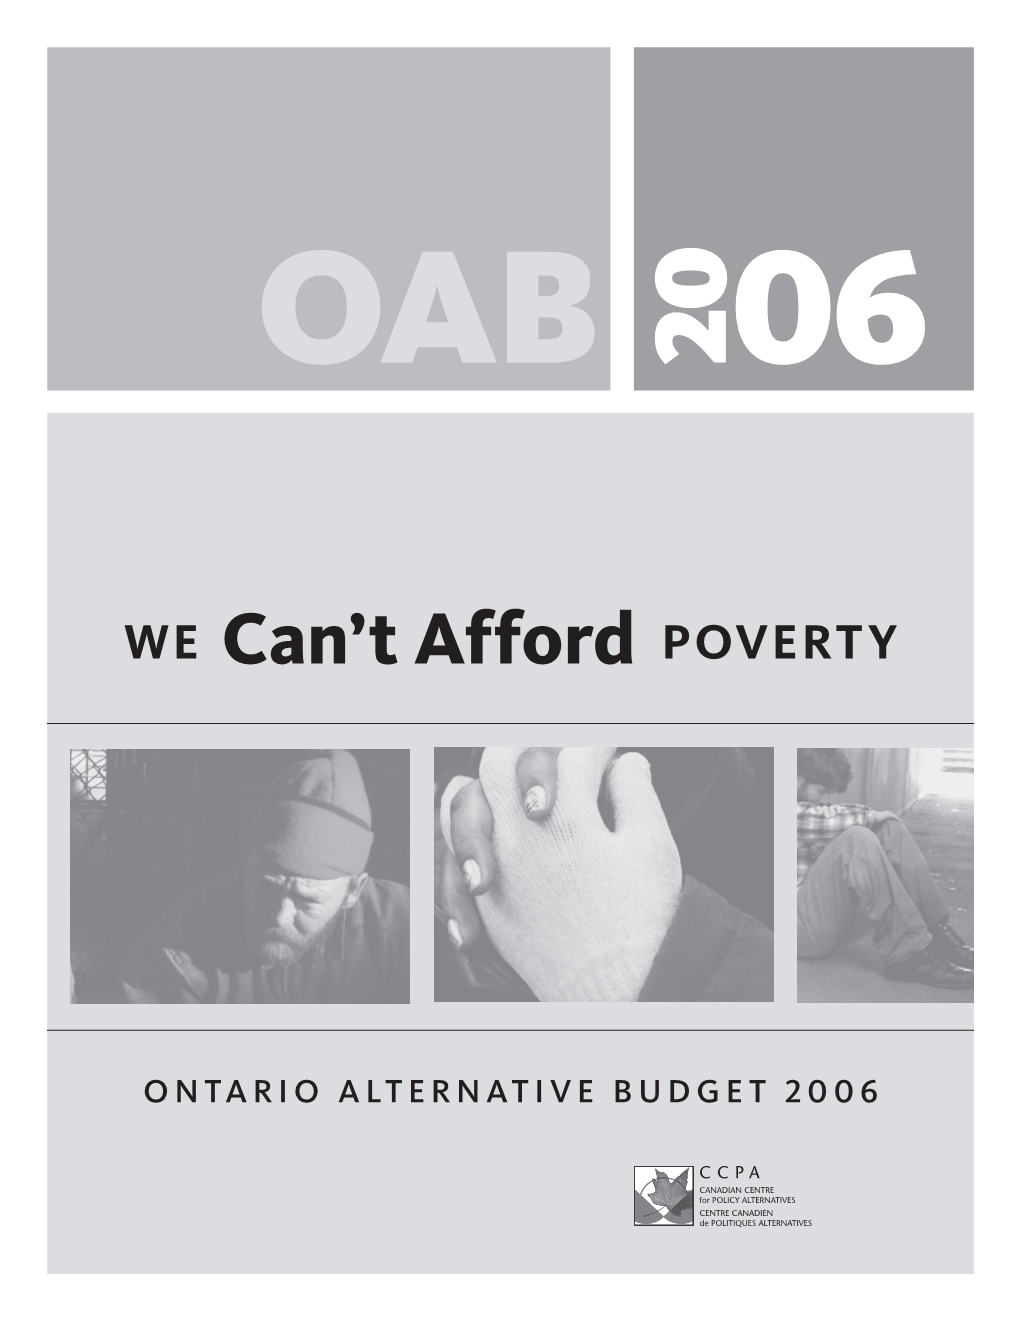 Ontario Alternative Budget 2006-7: We Can't Afford Poverty